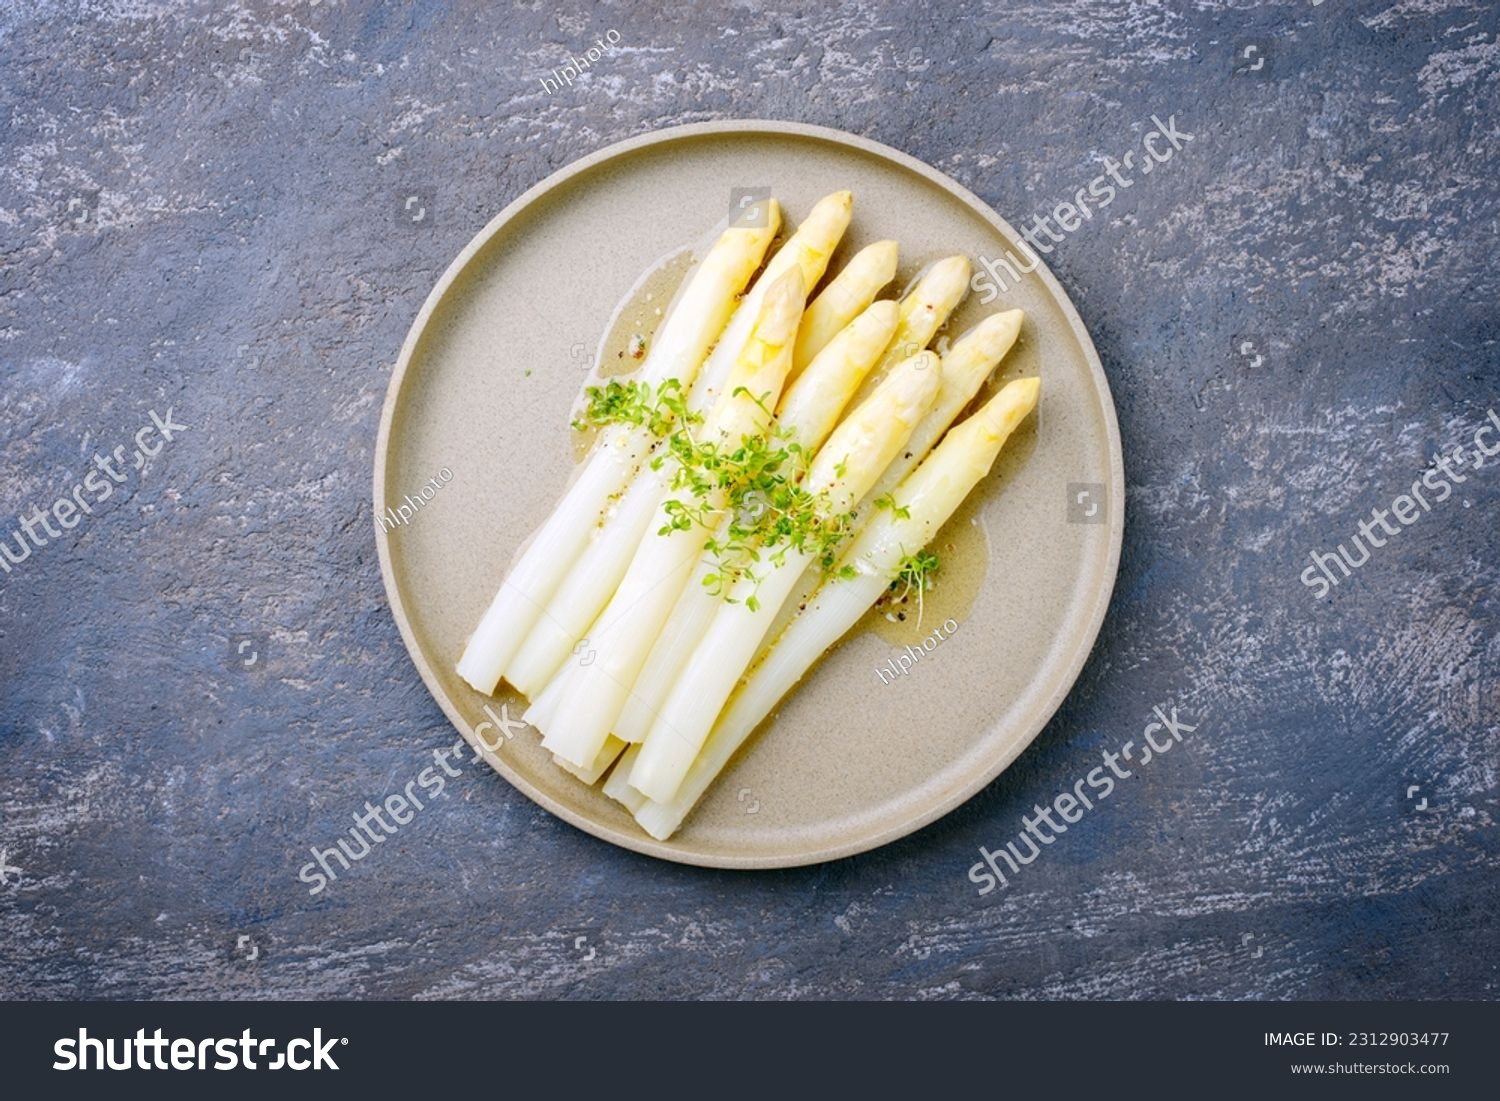 Modern style traditional steamed white asparagus with butter sauce hollandaise and cress served as top view on a Nordic design plate with copy space #2312903477